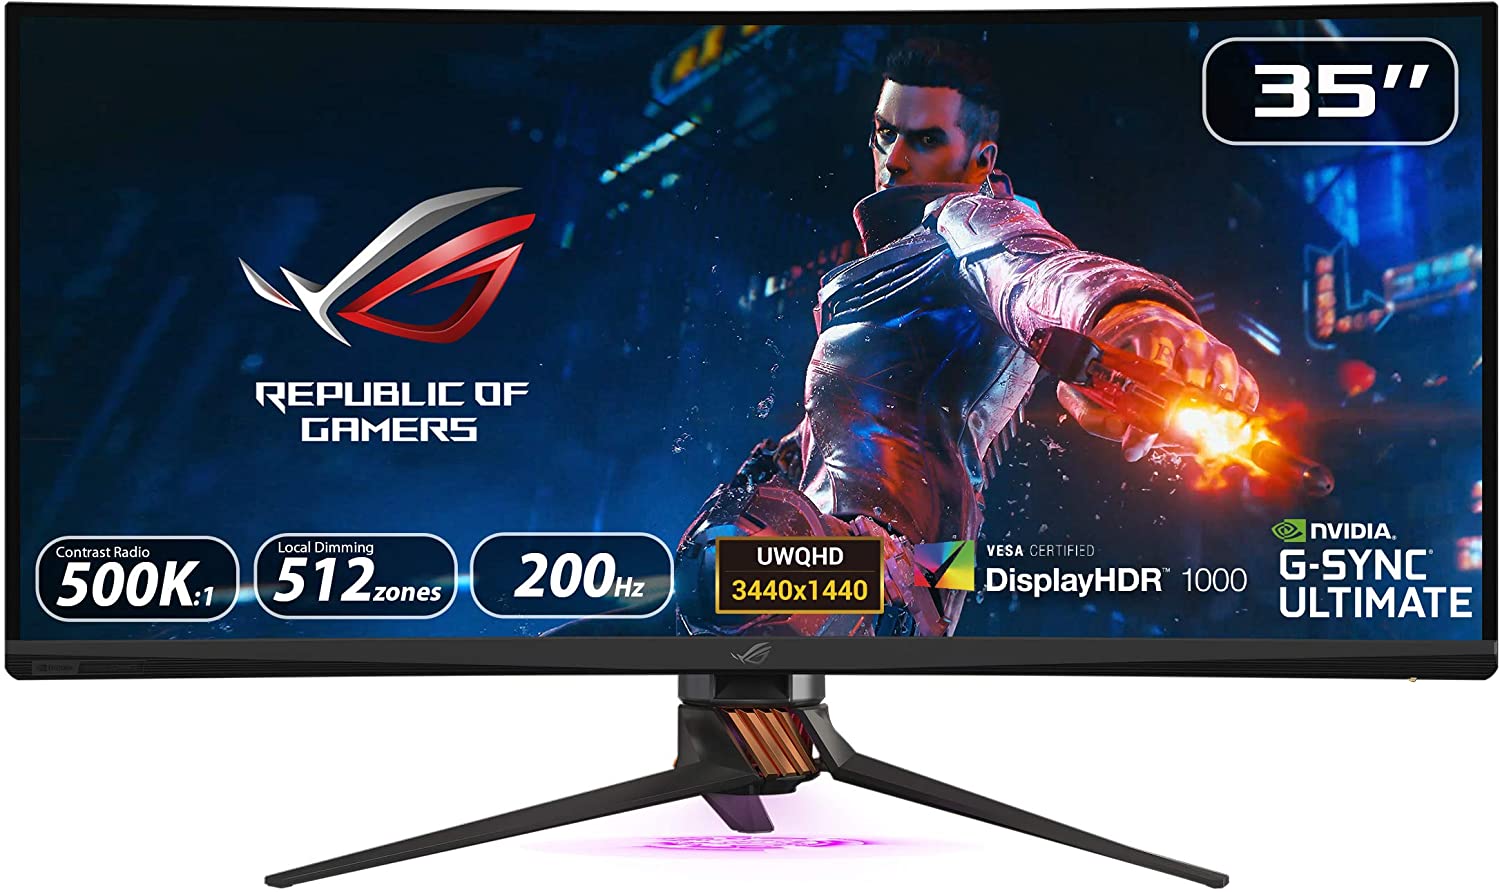 ASUS ROG Swift PG35VQ 35” Curved HDR Gaming Monitor 200Hz (3440 x 1440) 2ms G-SYNC Ultimate Eye Care DisplayPort HDMI USB Aura Sync